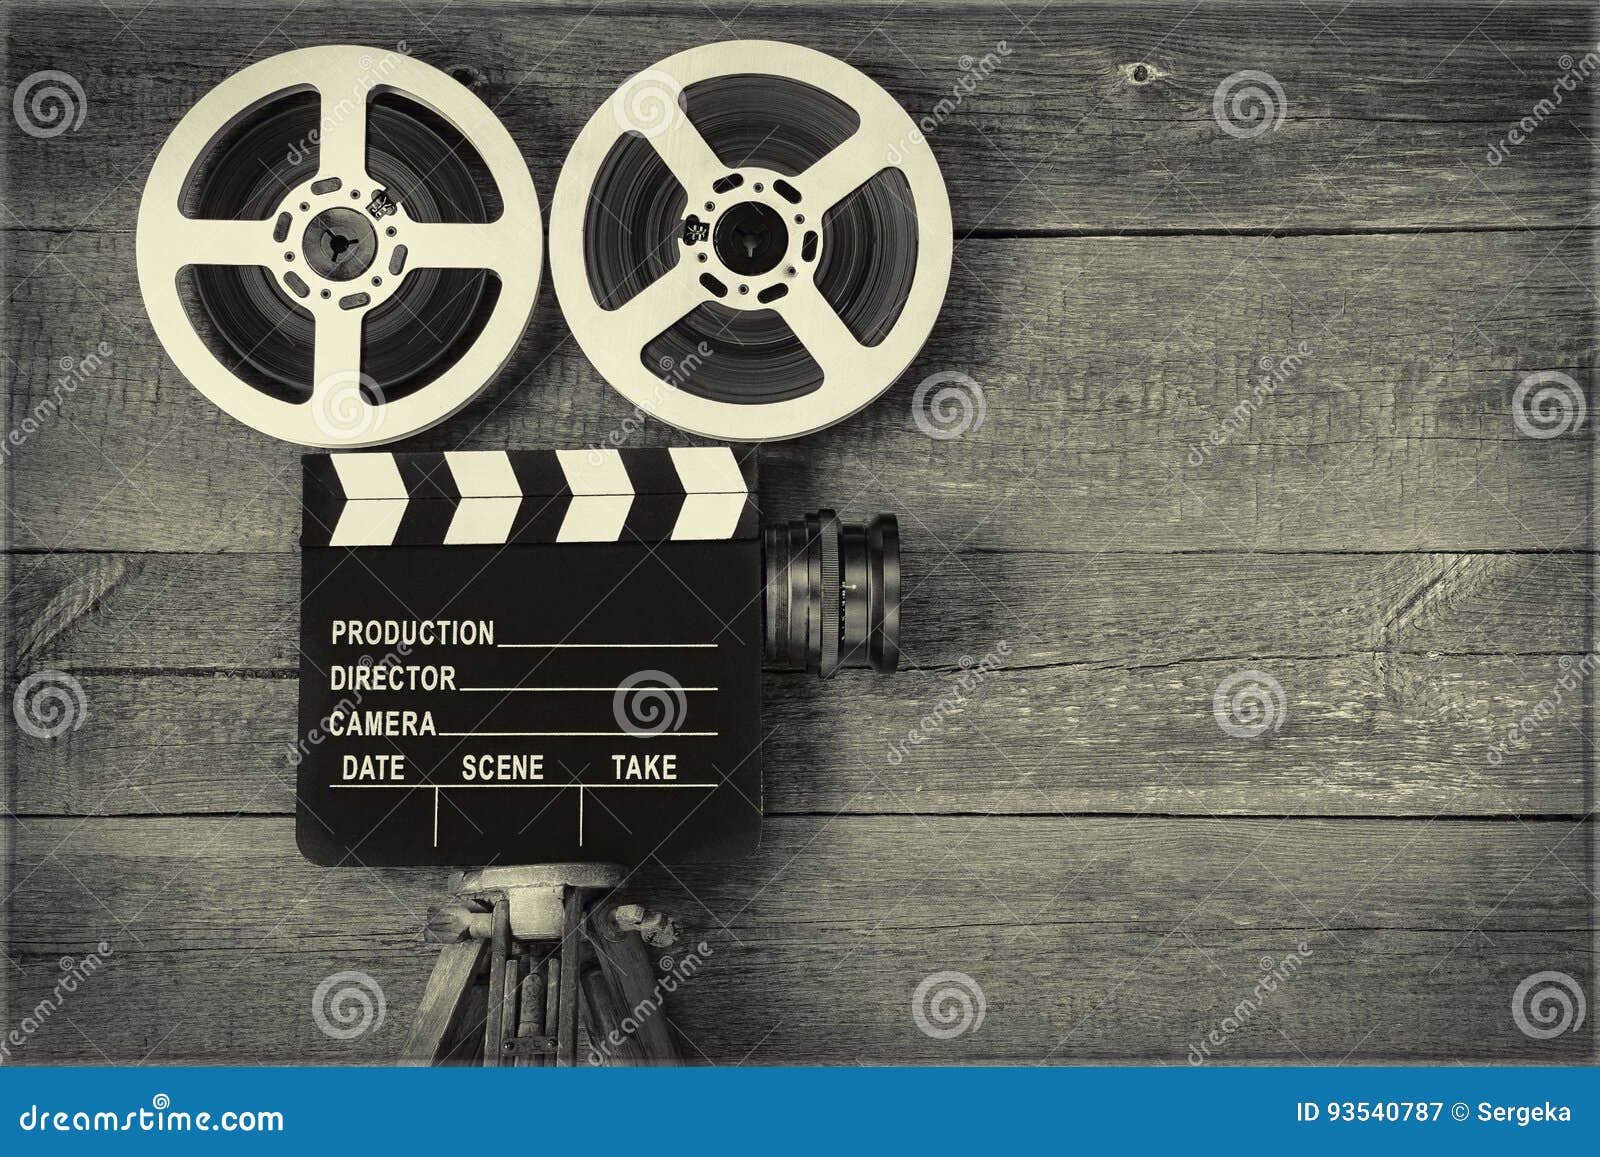 https://thumbs.dreamstime.com/z/old-movie-camera-consisting-tripod-lens-film-reels-clapperboards-toned-photo-93540787.jpg